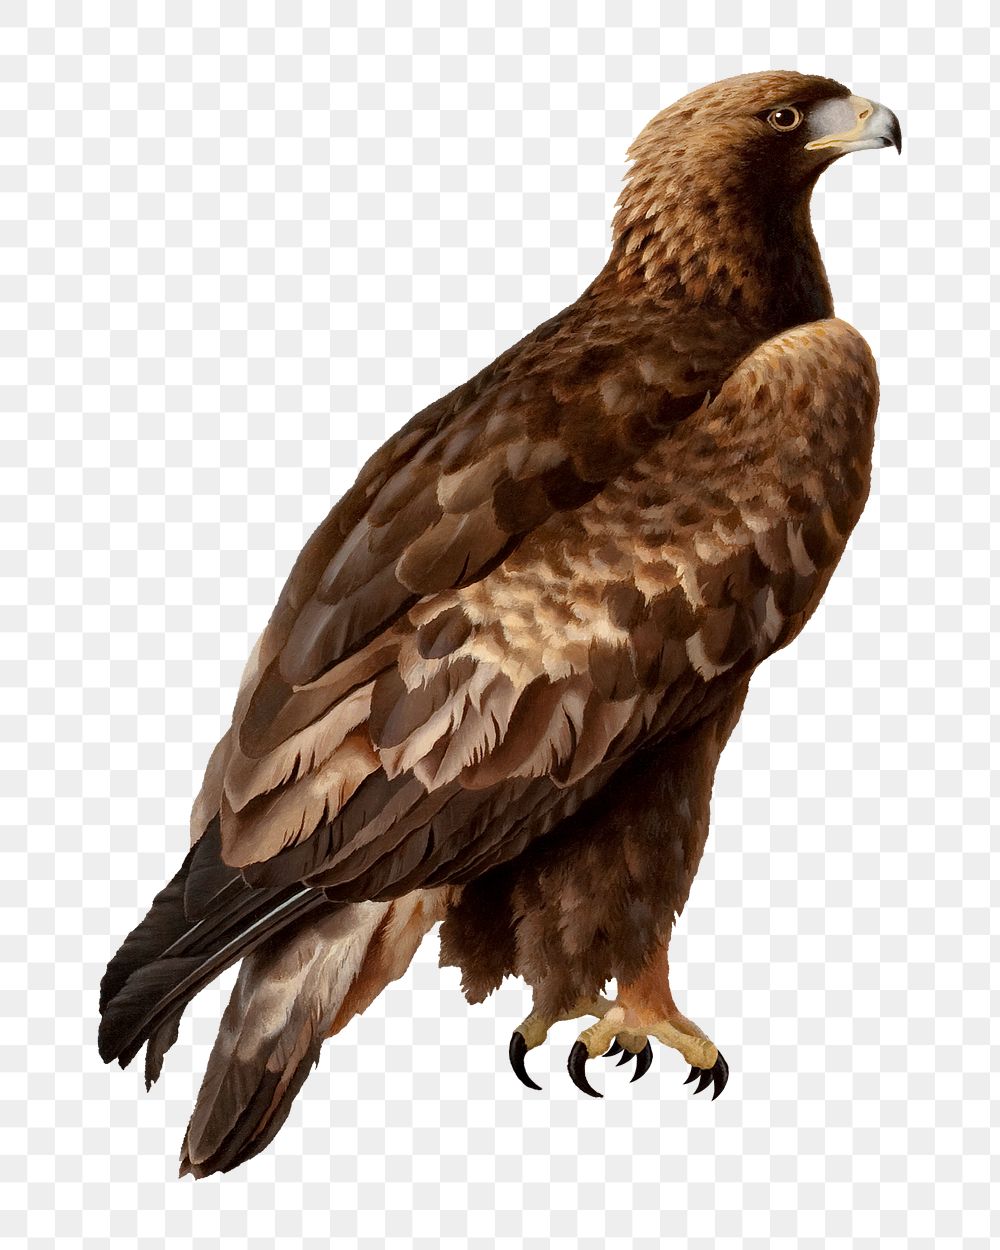 Golden eagle png wild animal, transparent background. Remixed by rawpixel.